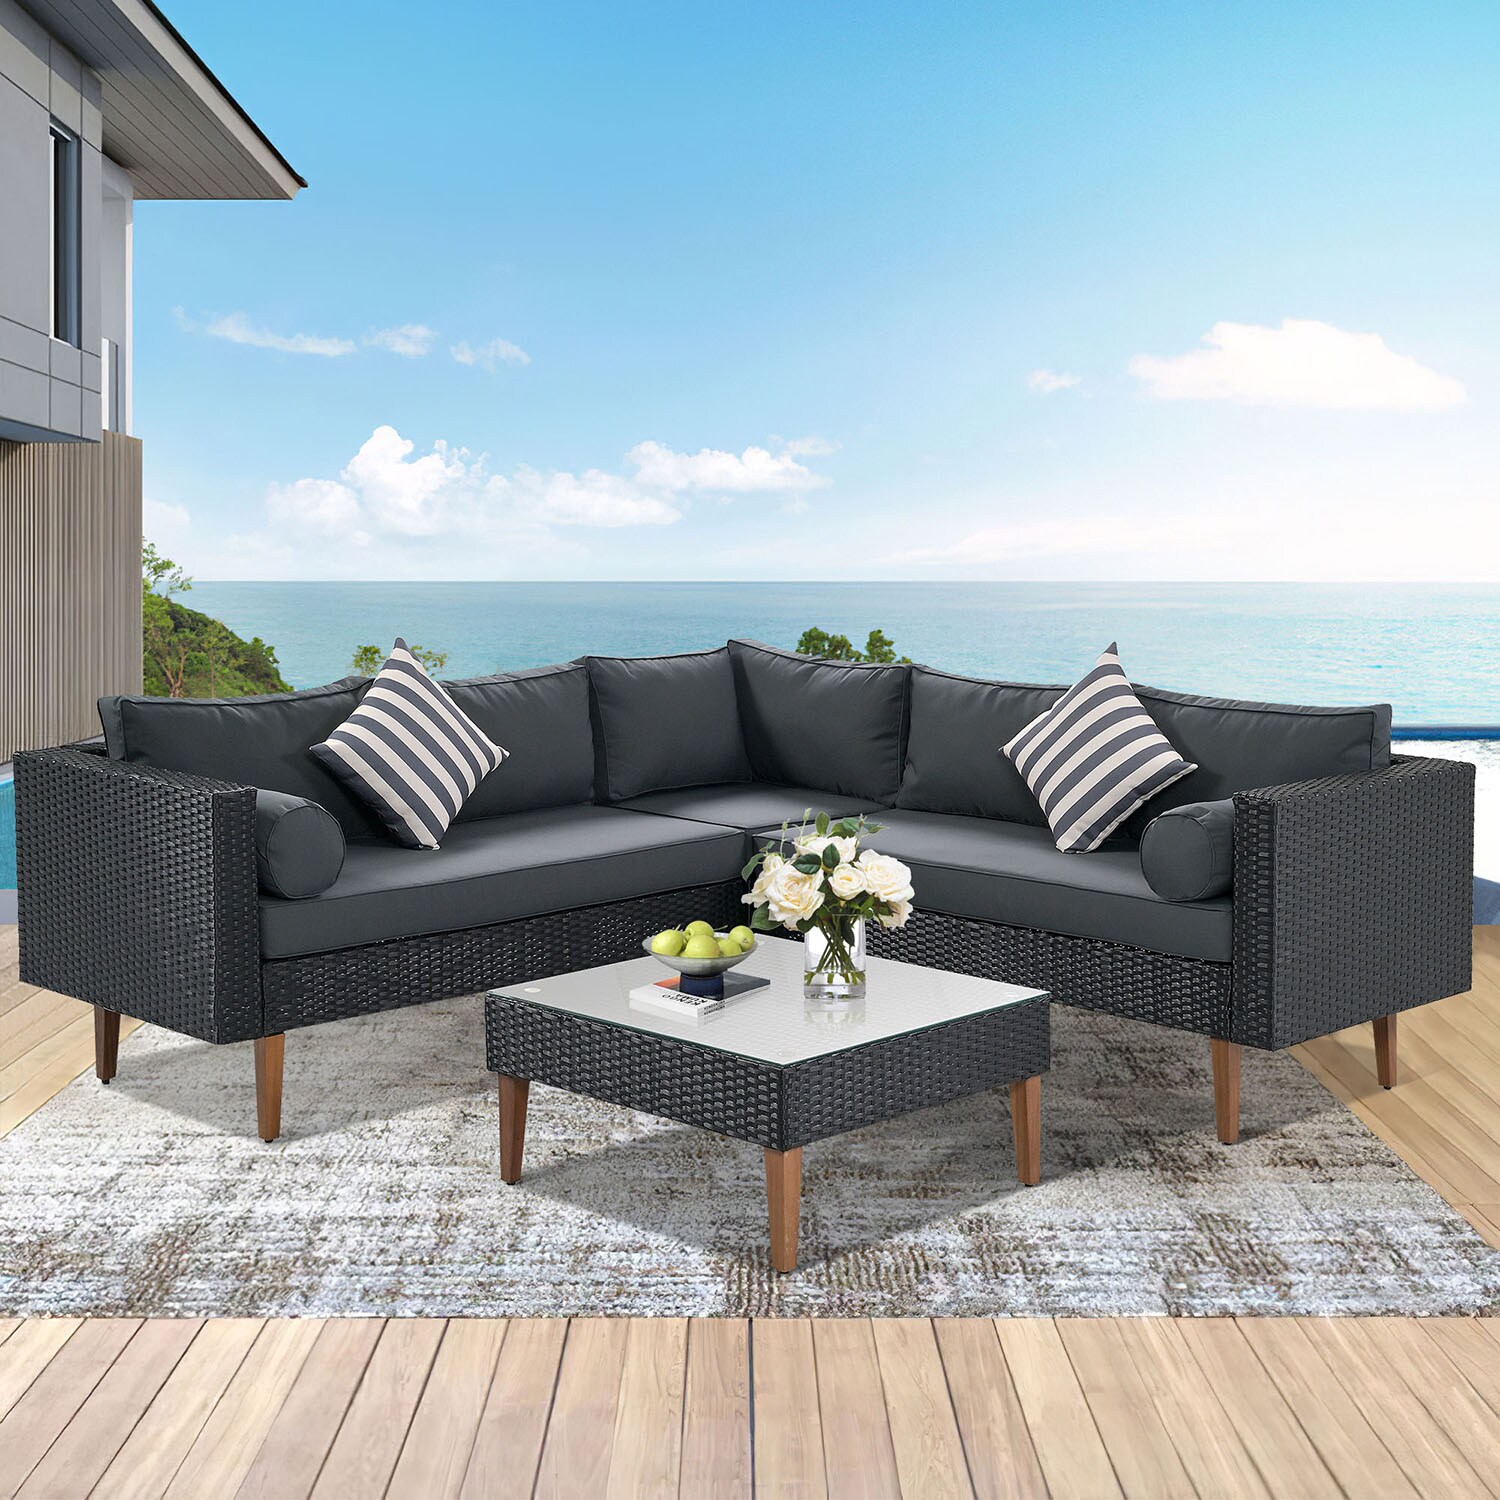 Maincraft 4-pieces Outdoor Wicker Sofa Set, Patio Furniture with